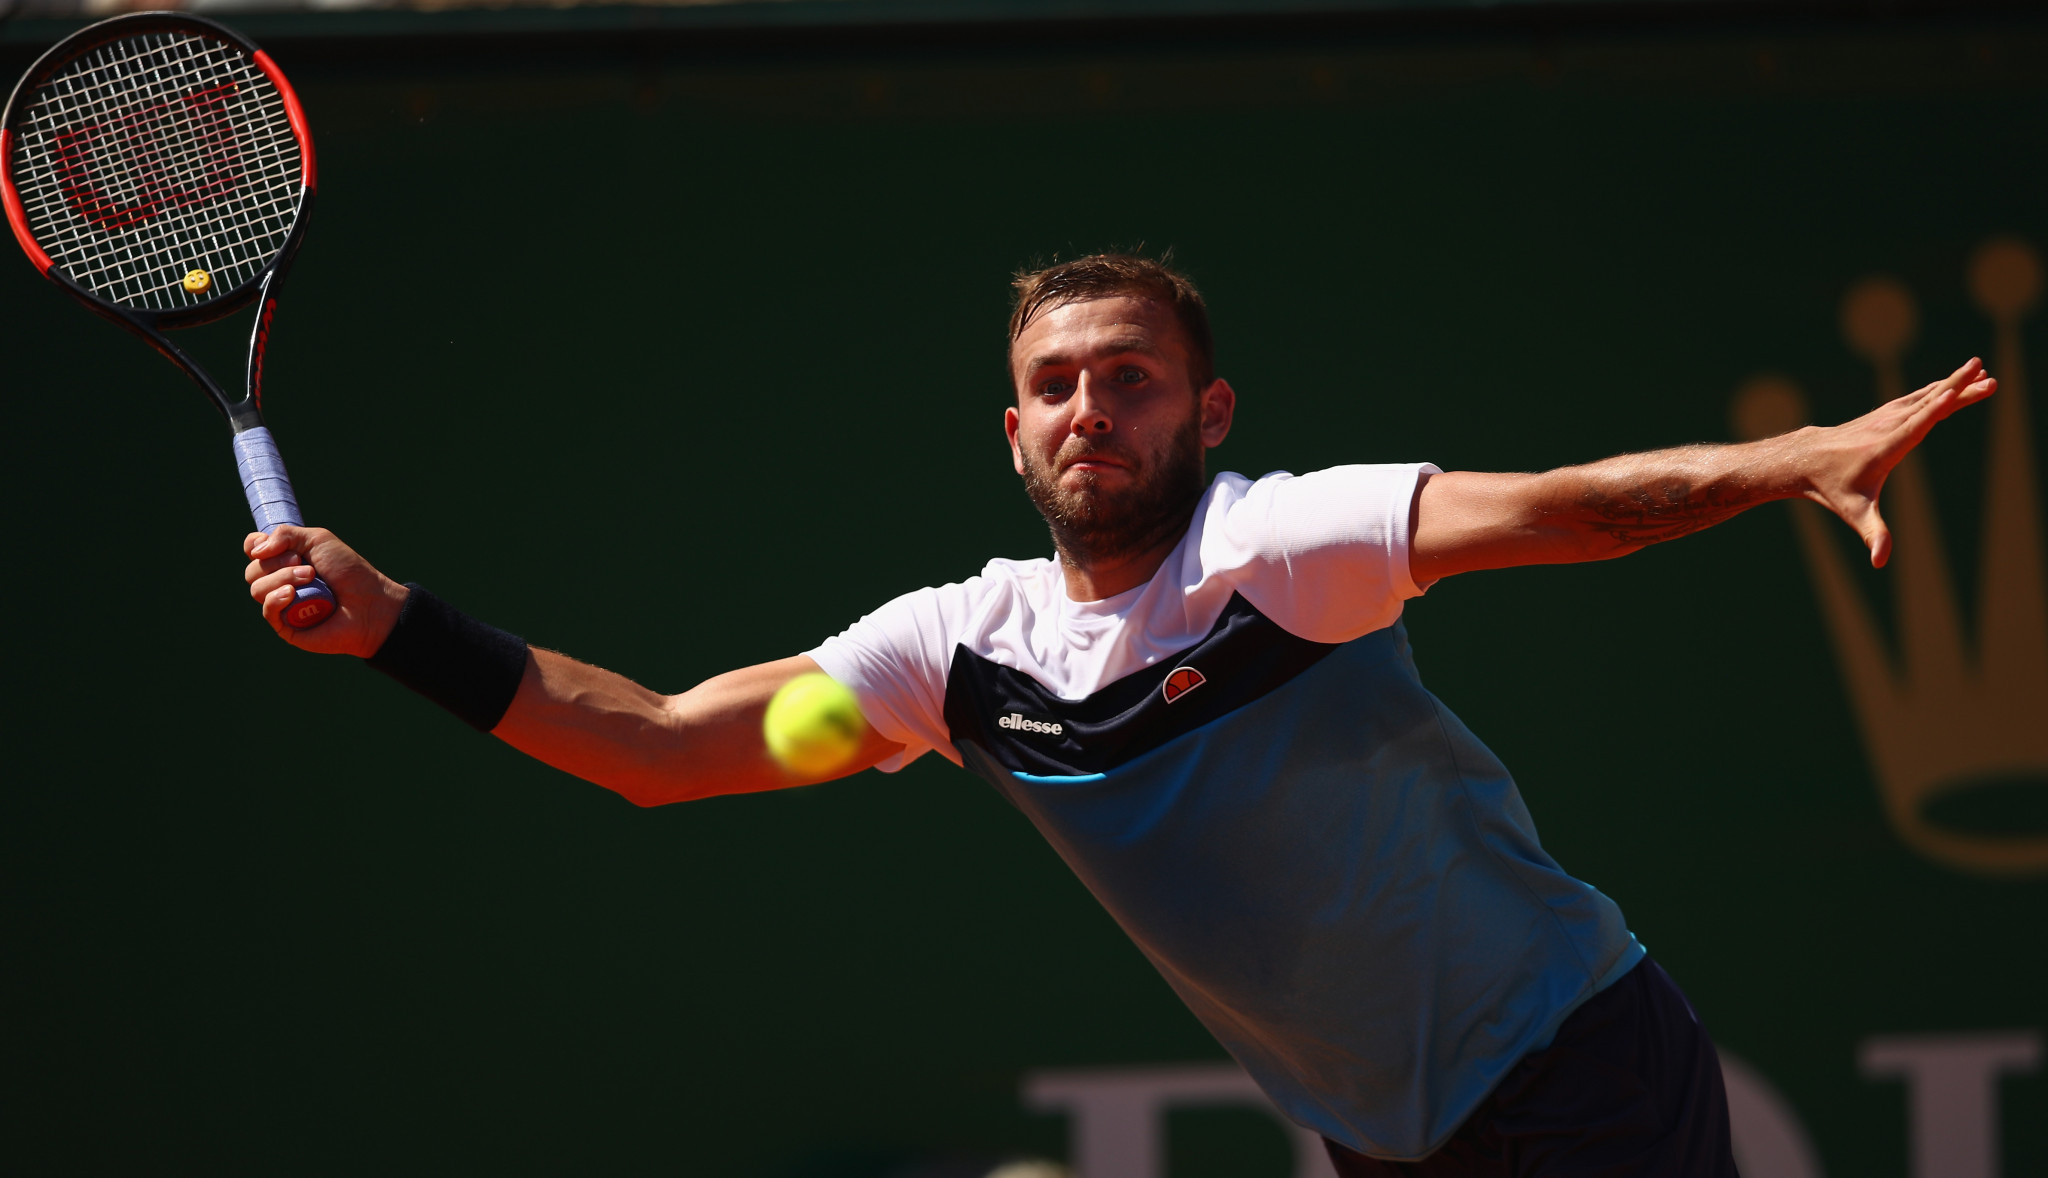 Dan Evans was given a wildcard after the LTA confirmed he had passed the agreed checks ©Getty Images